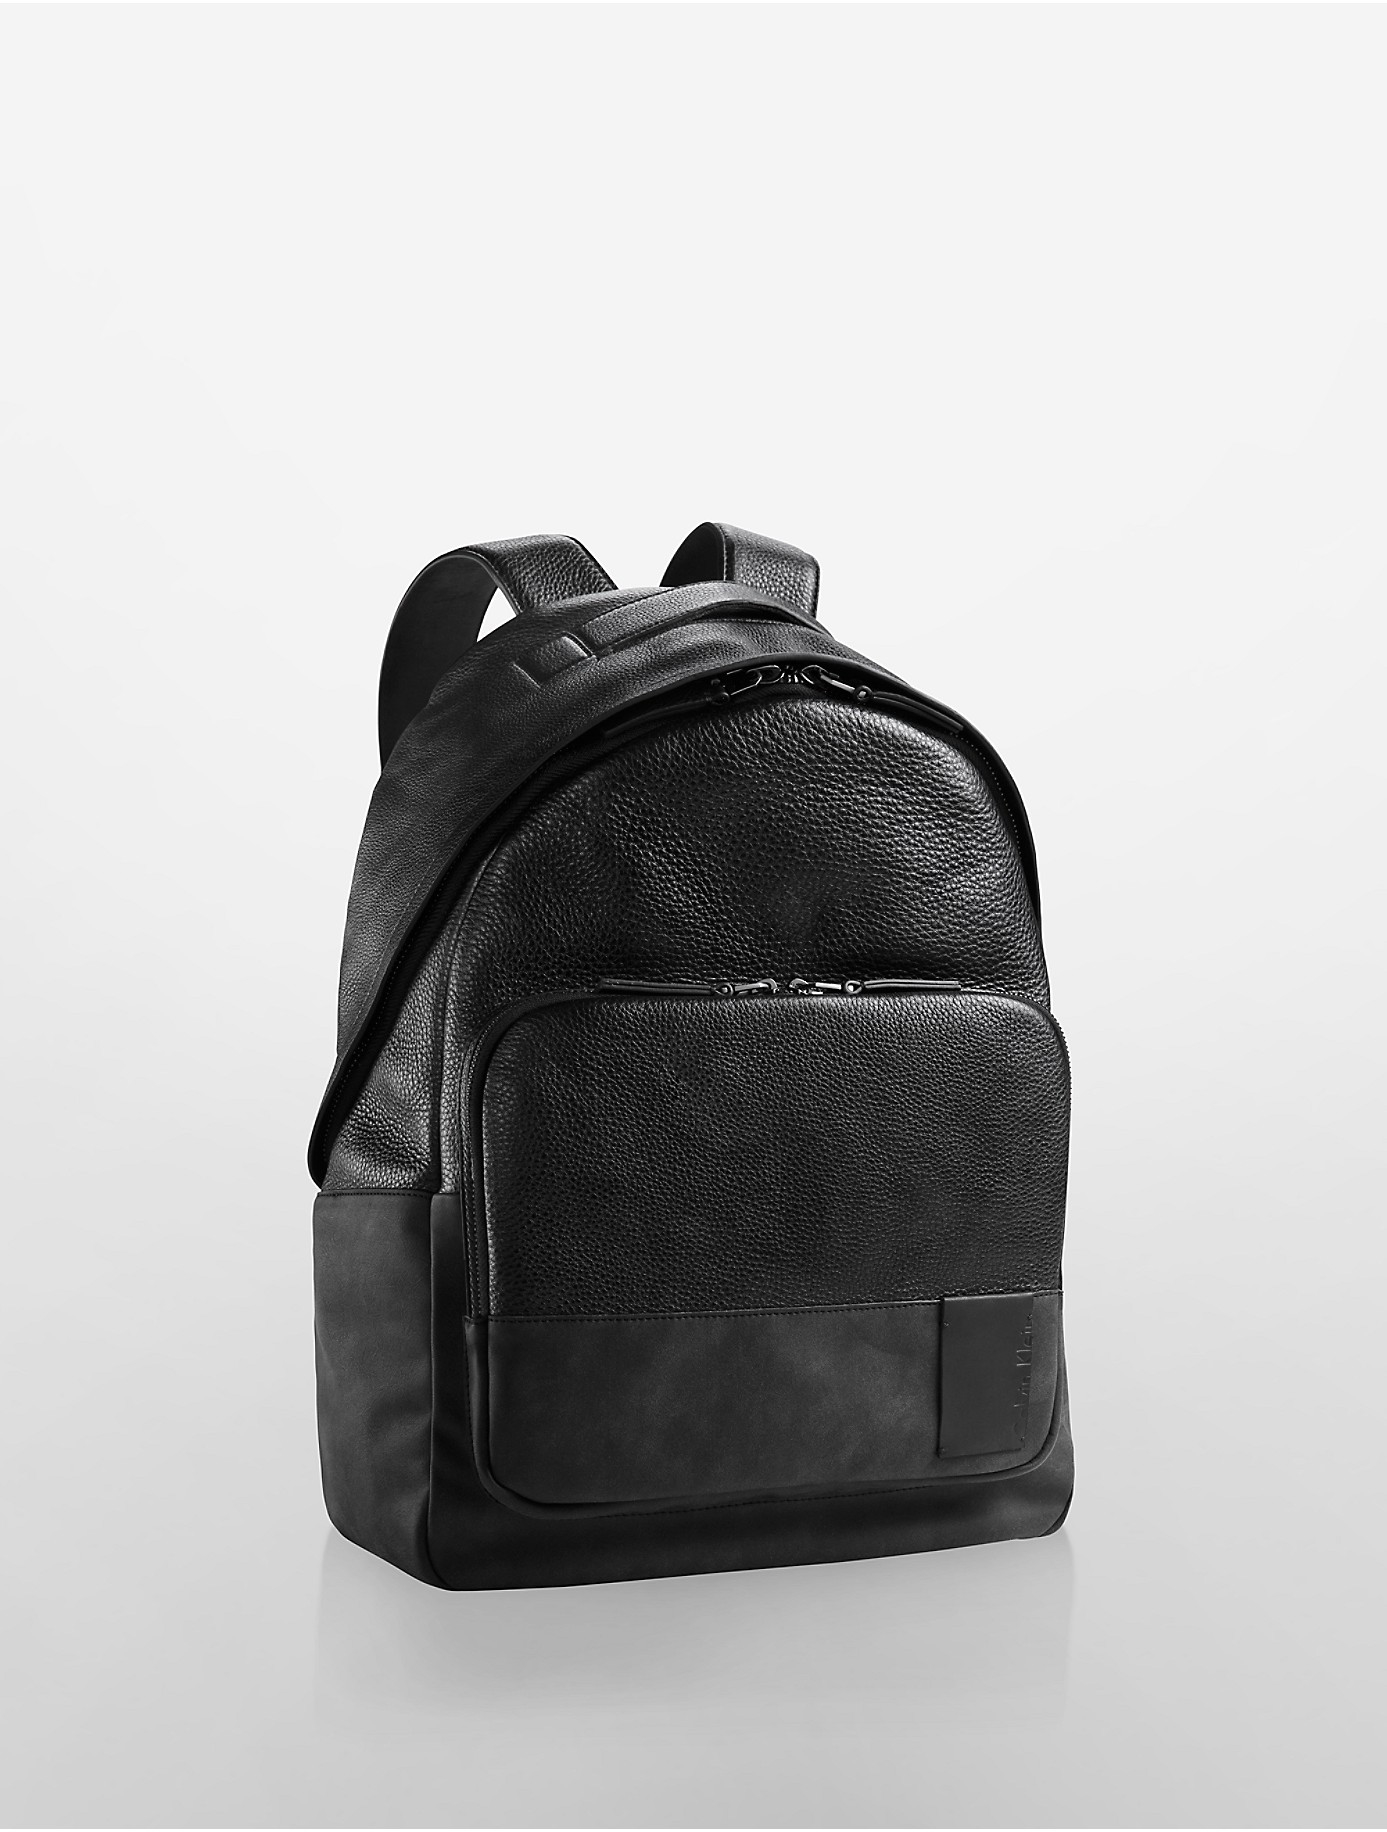 Calvin Klein Black Leather Backpack, Buy Now, Clearance, 51% OFF,  sportsregras.com